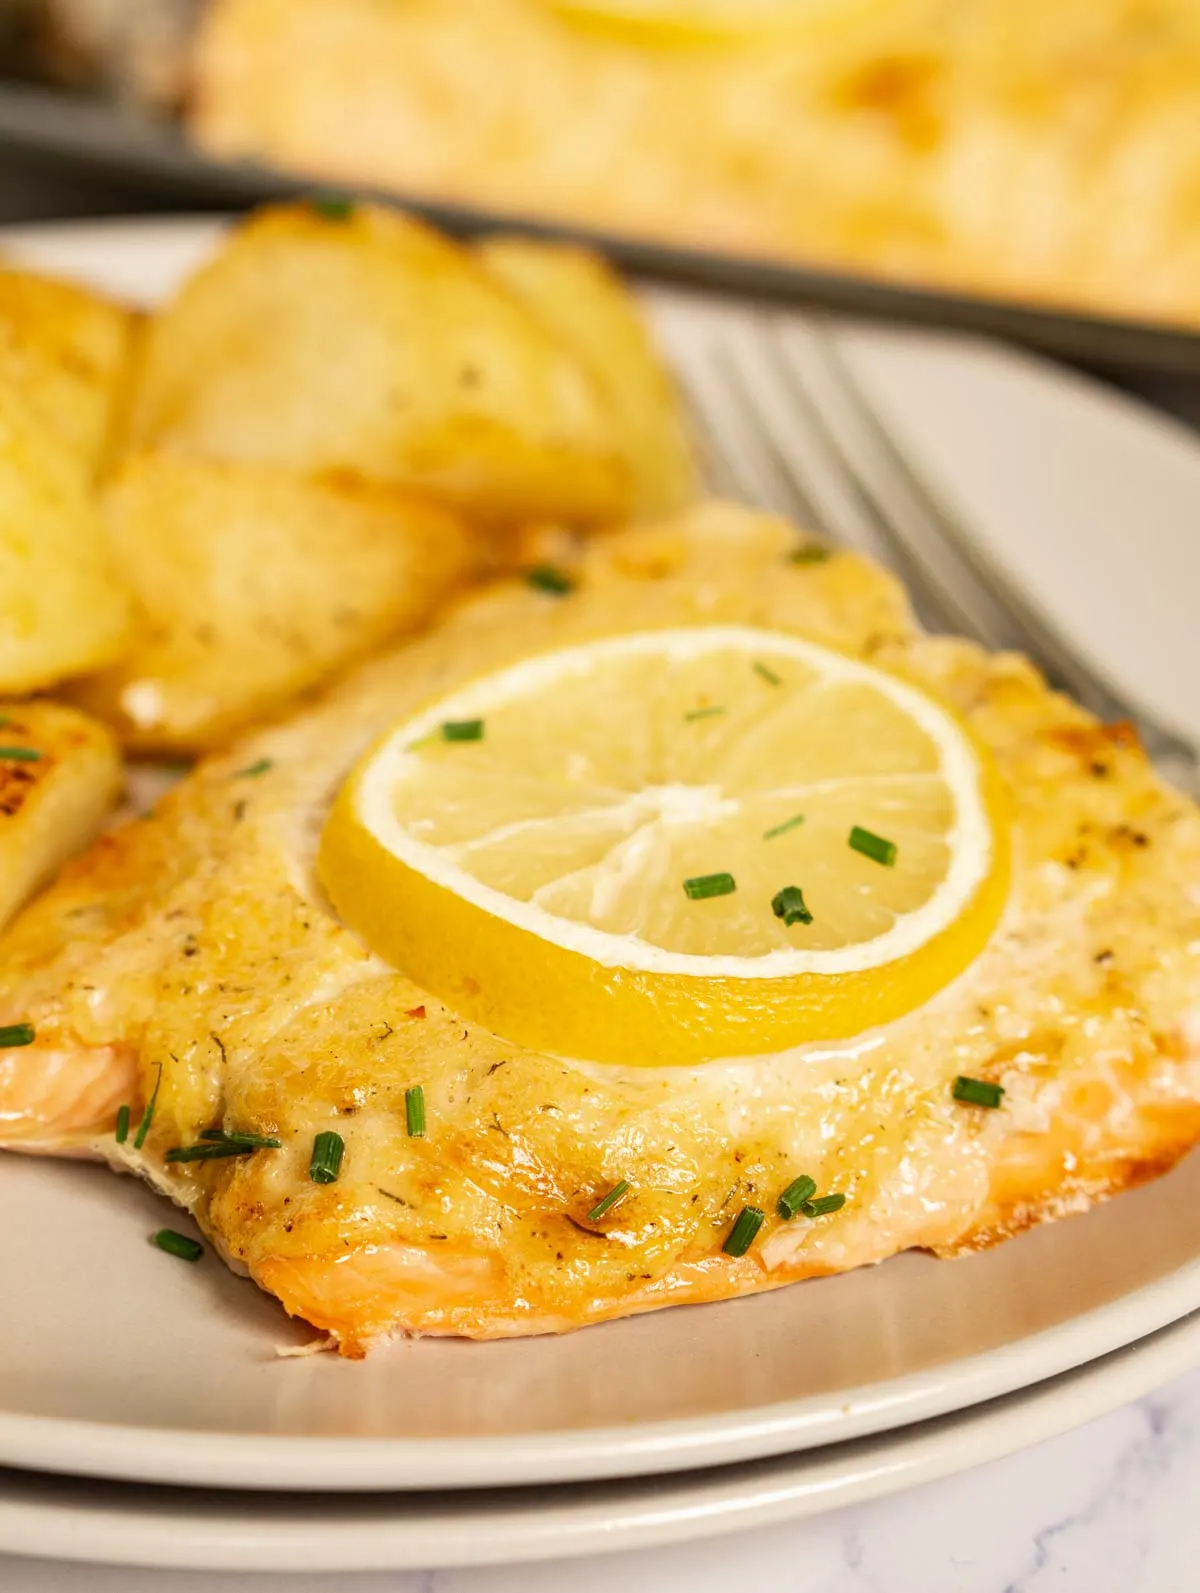 Mayo baked salmon fillet on a plate